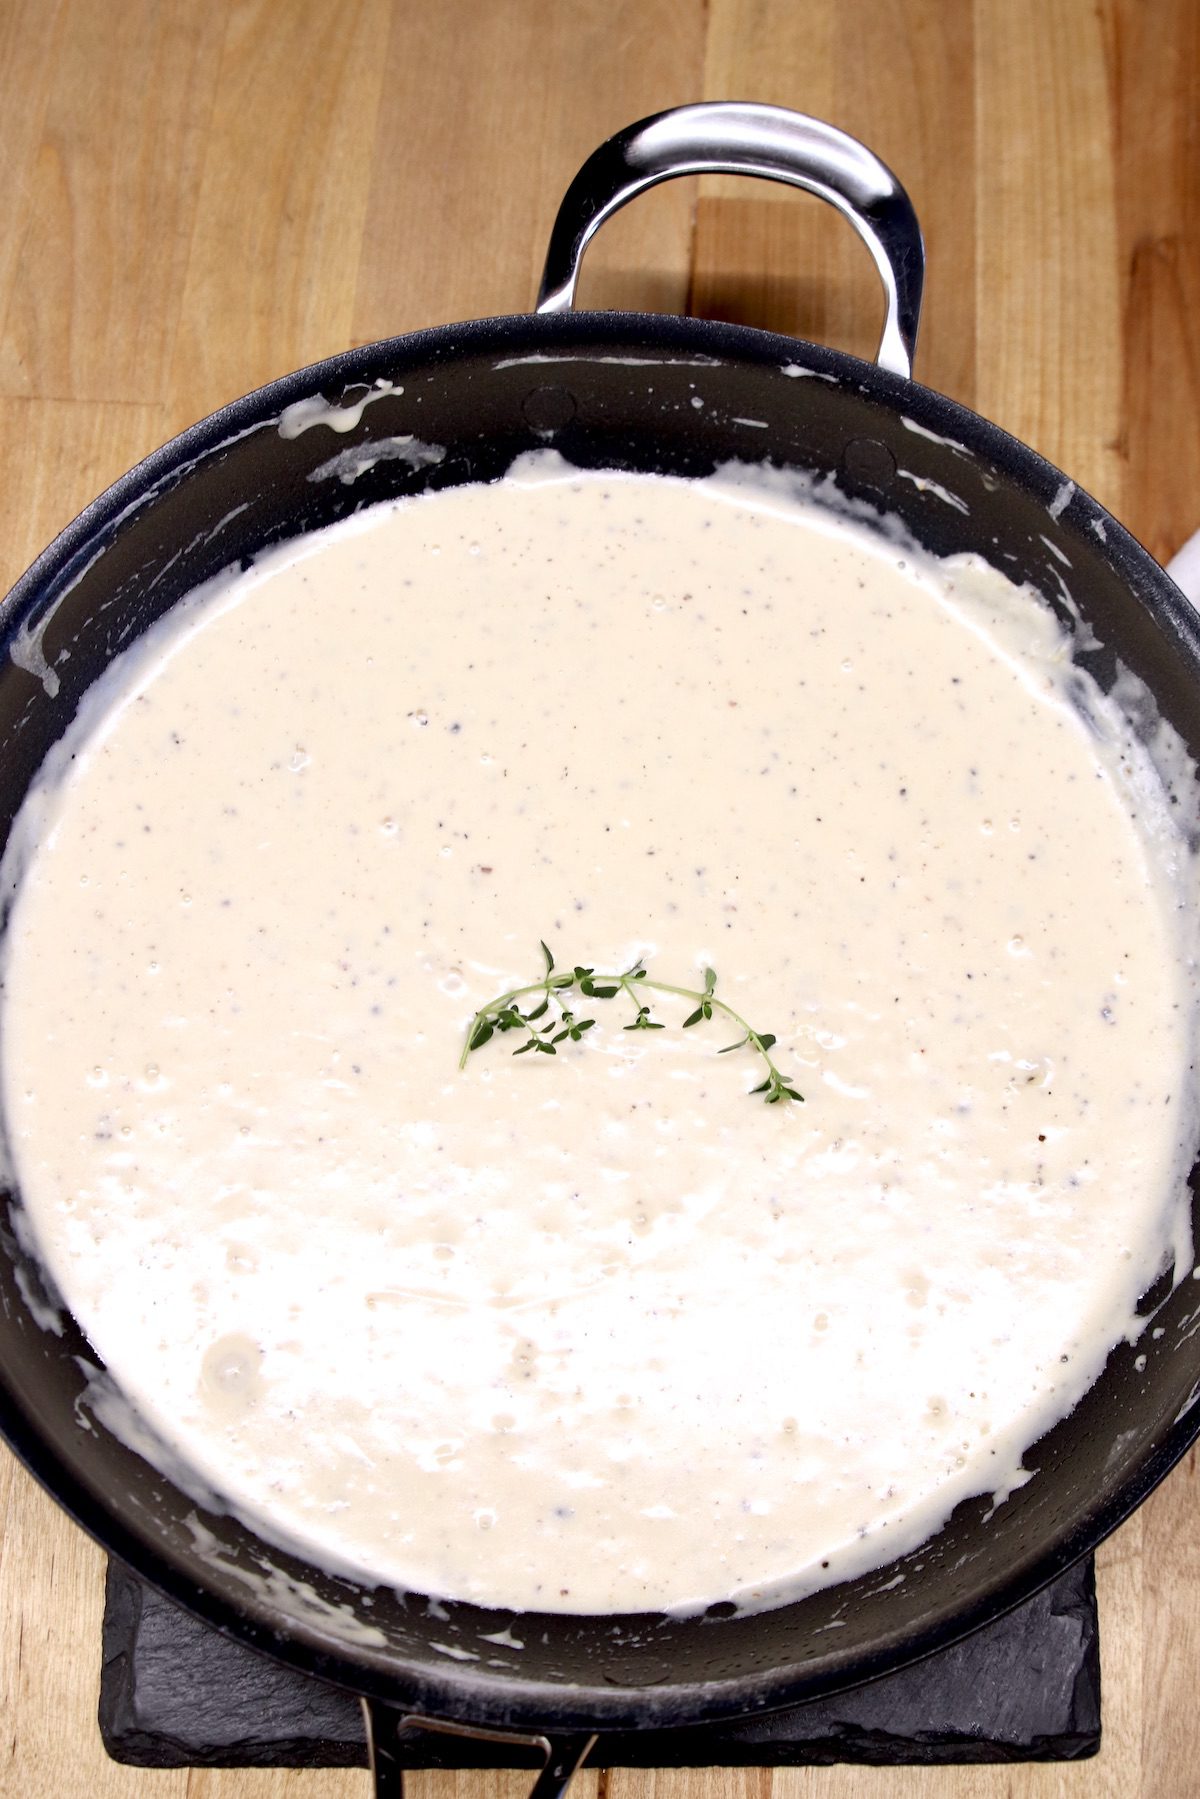 skillet of sour cream sauce with thyme garnish